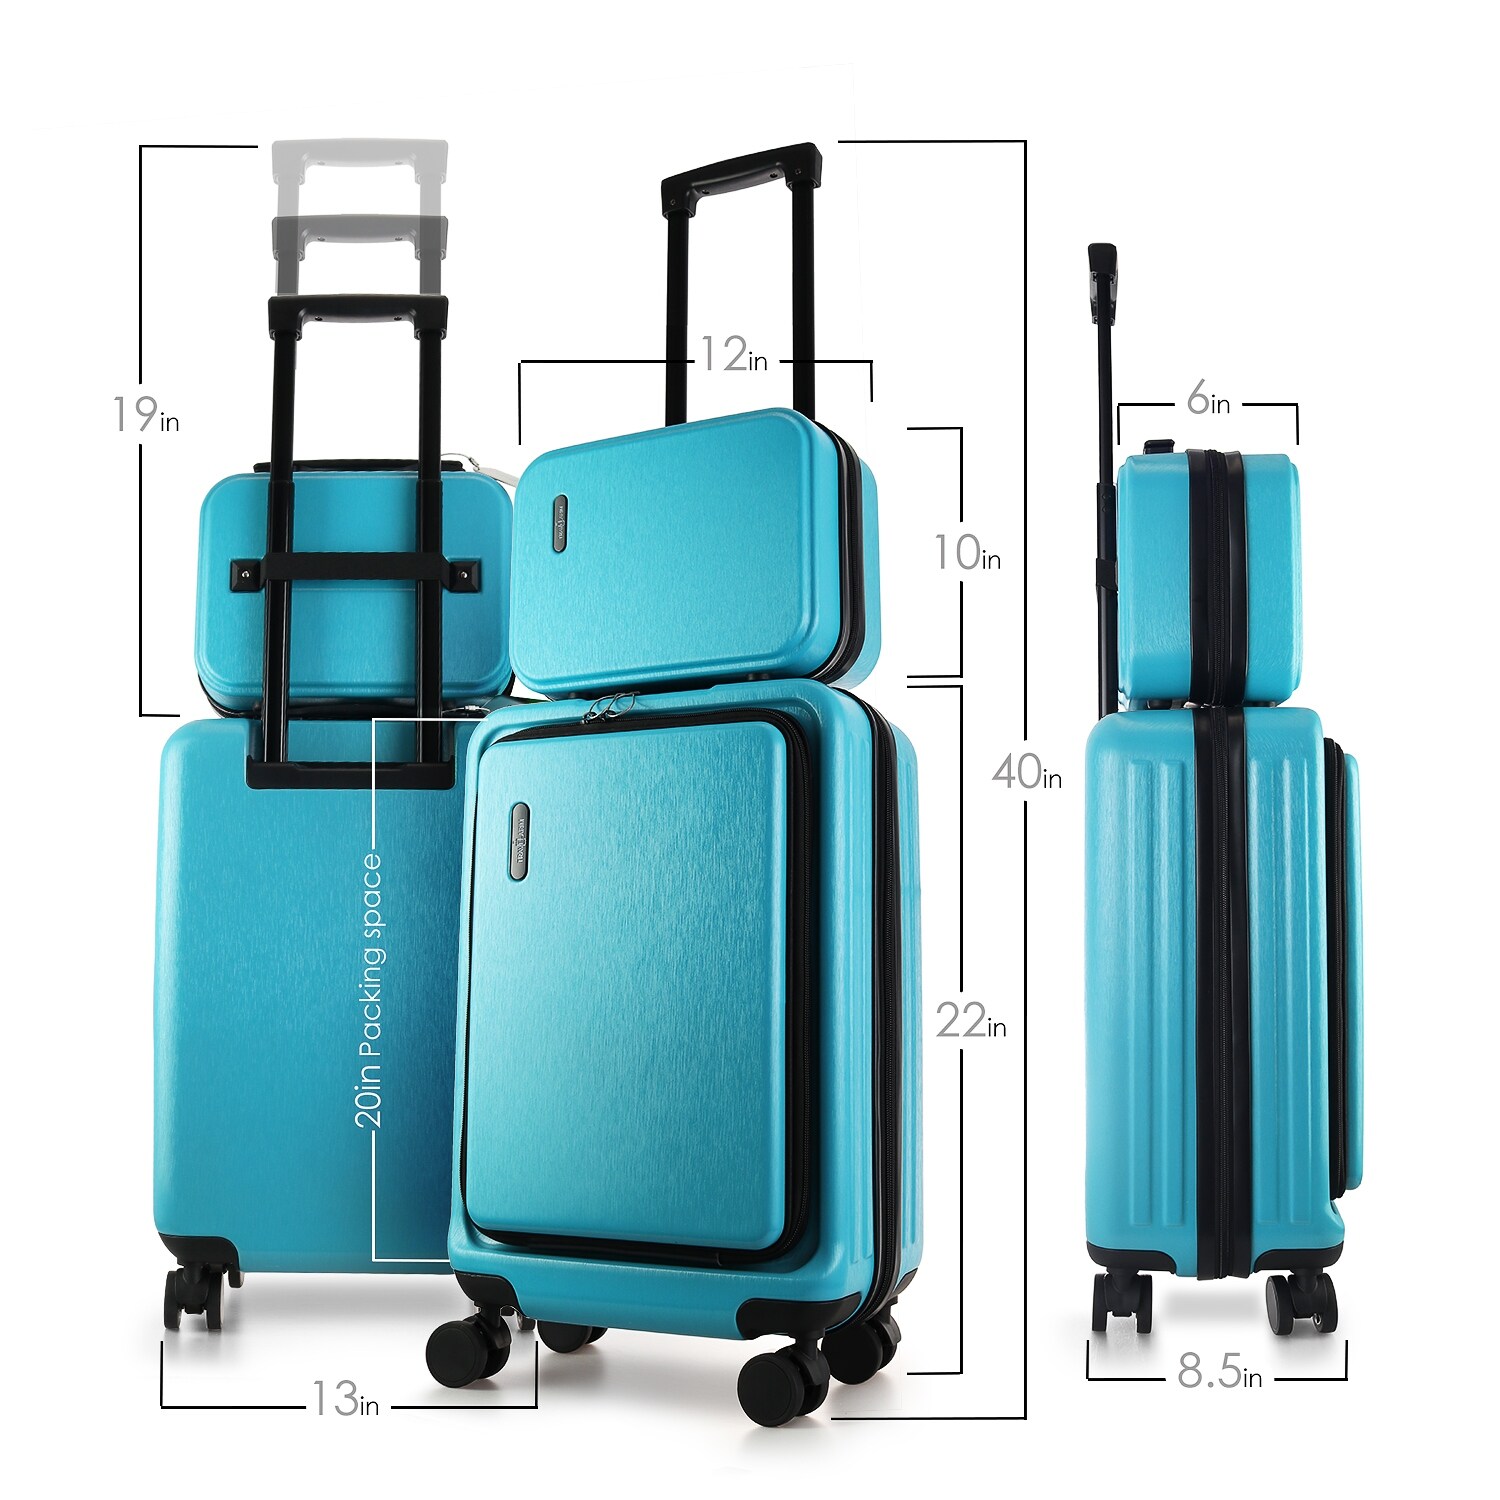 TravelArim Airline Approved Durable Carry-On Luggage 22x14x9 - Lightweight  Carry On Suitcase Set with Small Cosmetic Case - Bed Bath & Beyond -  36351948